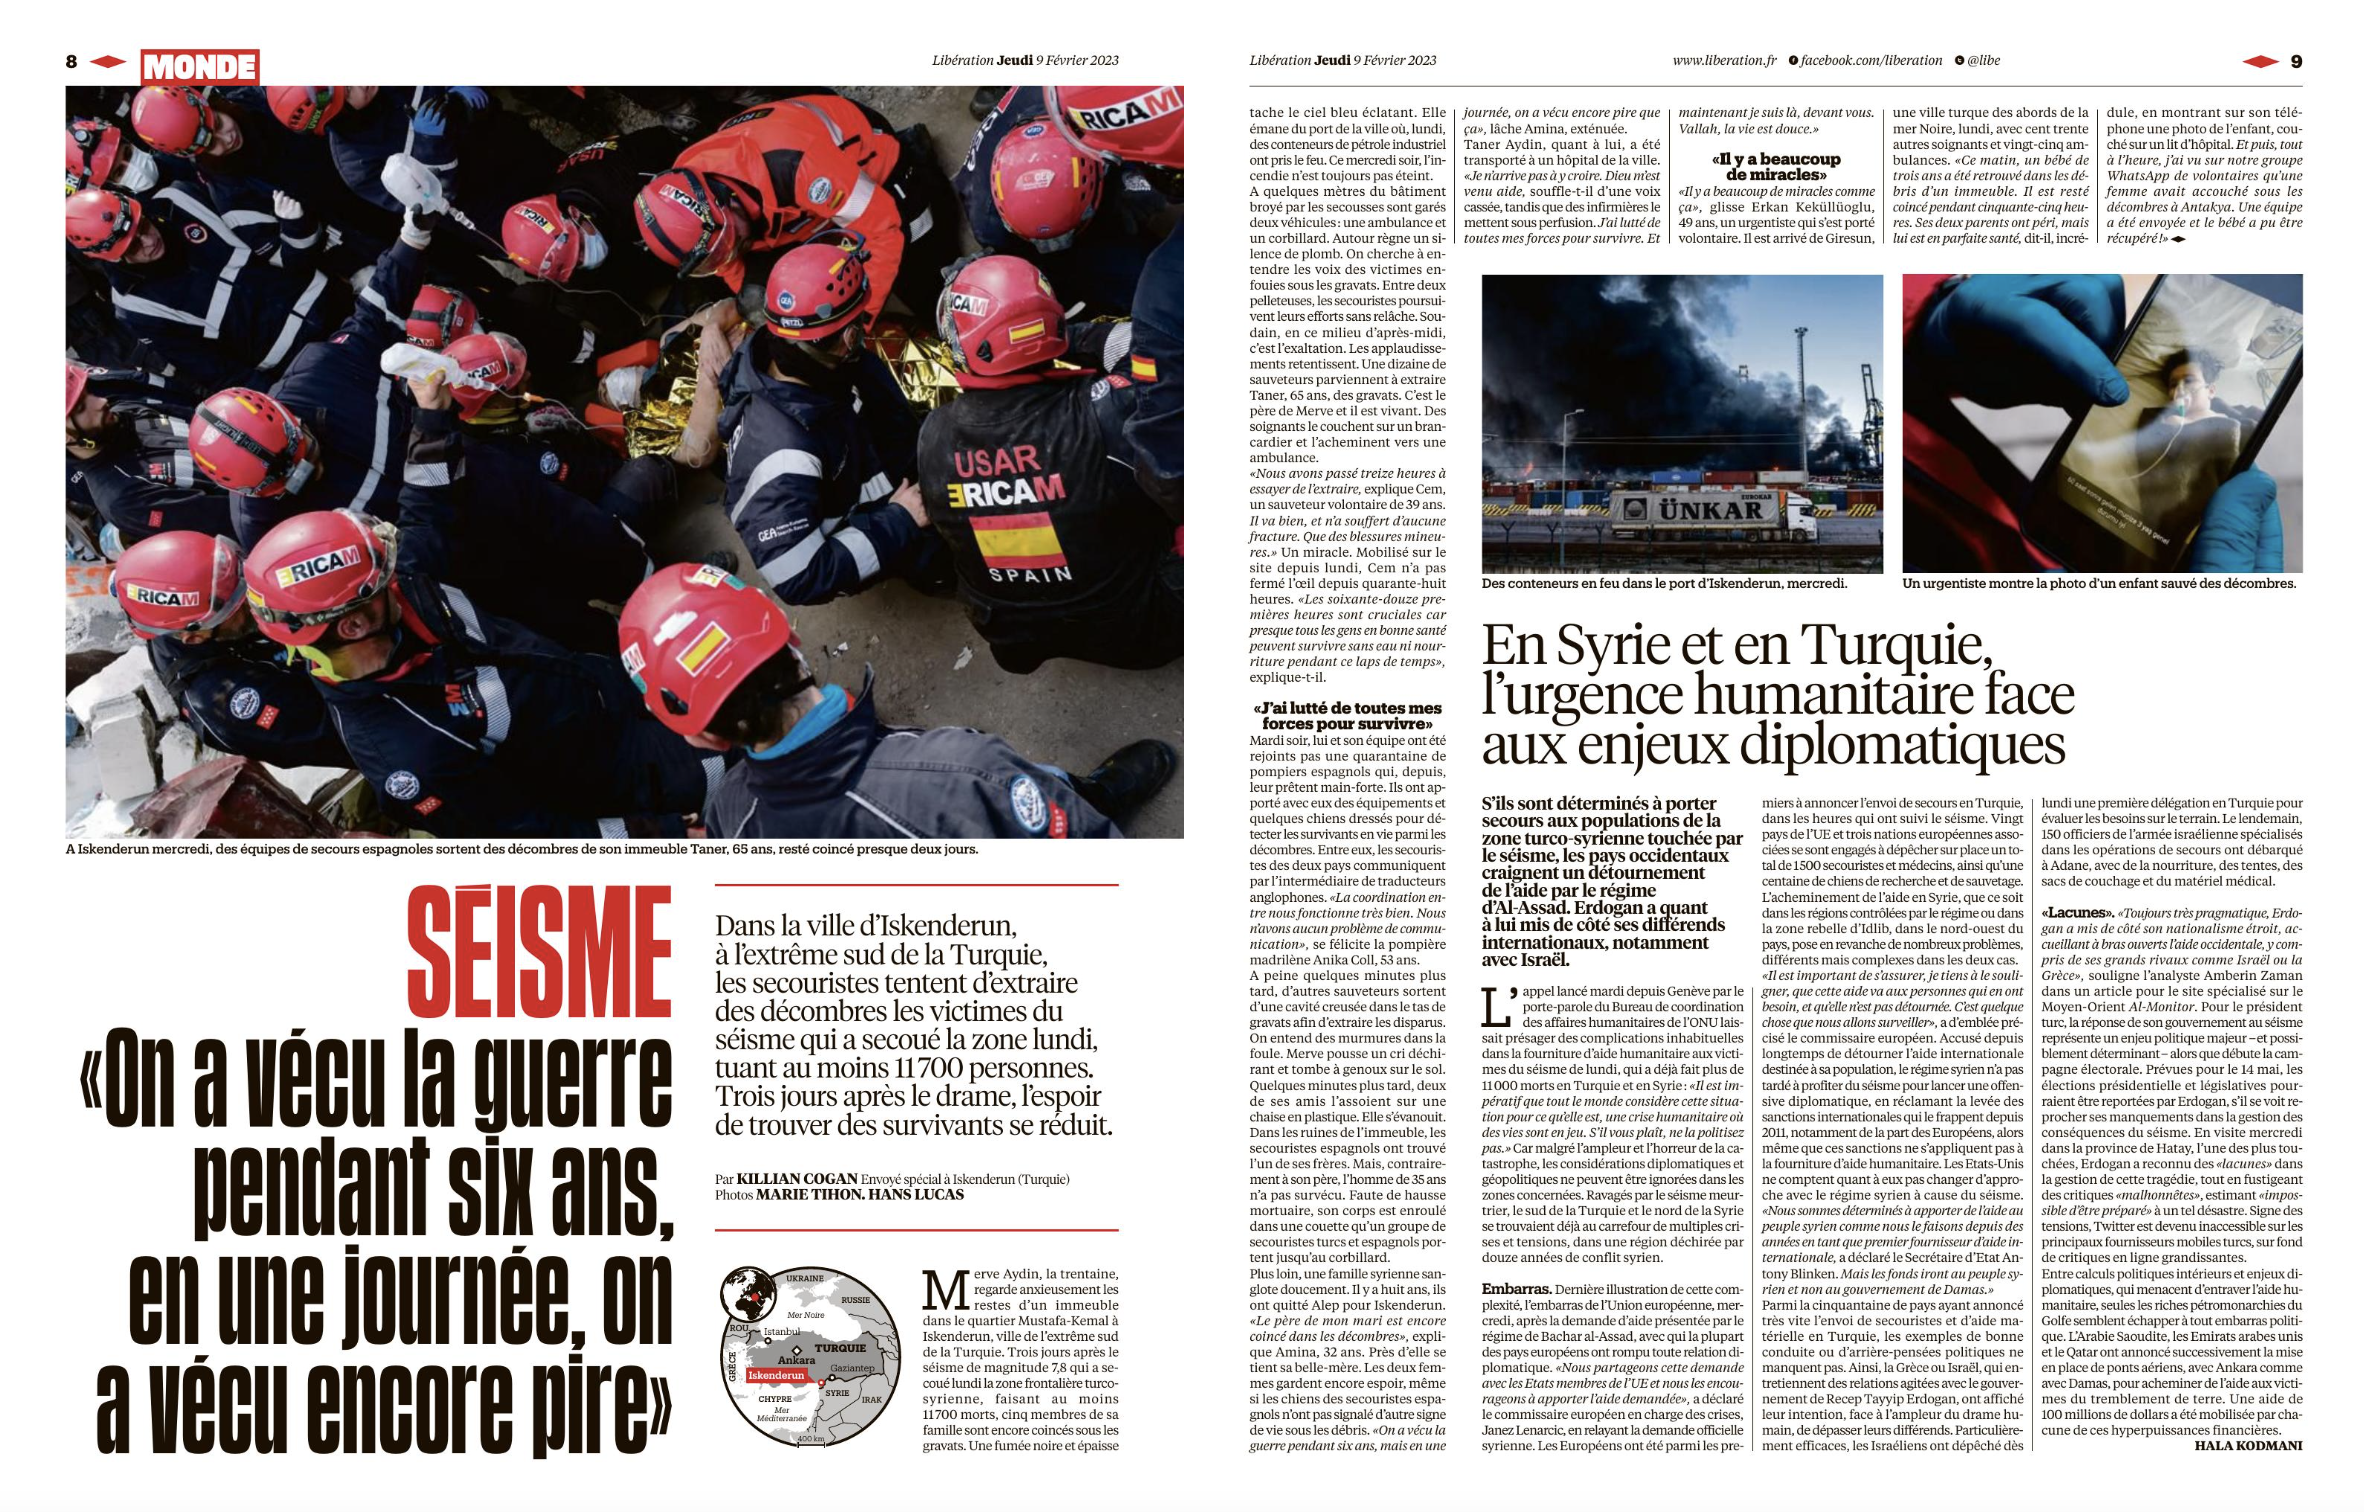 Image from Publications - Assignment for Libération